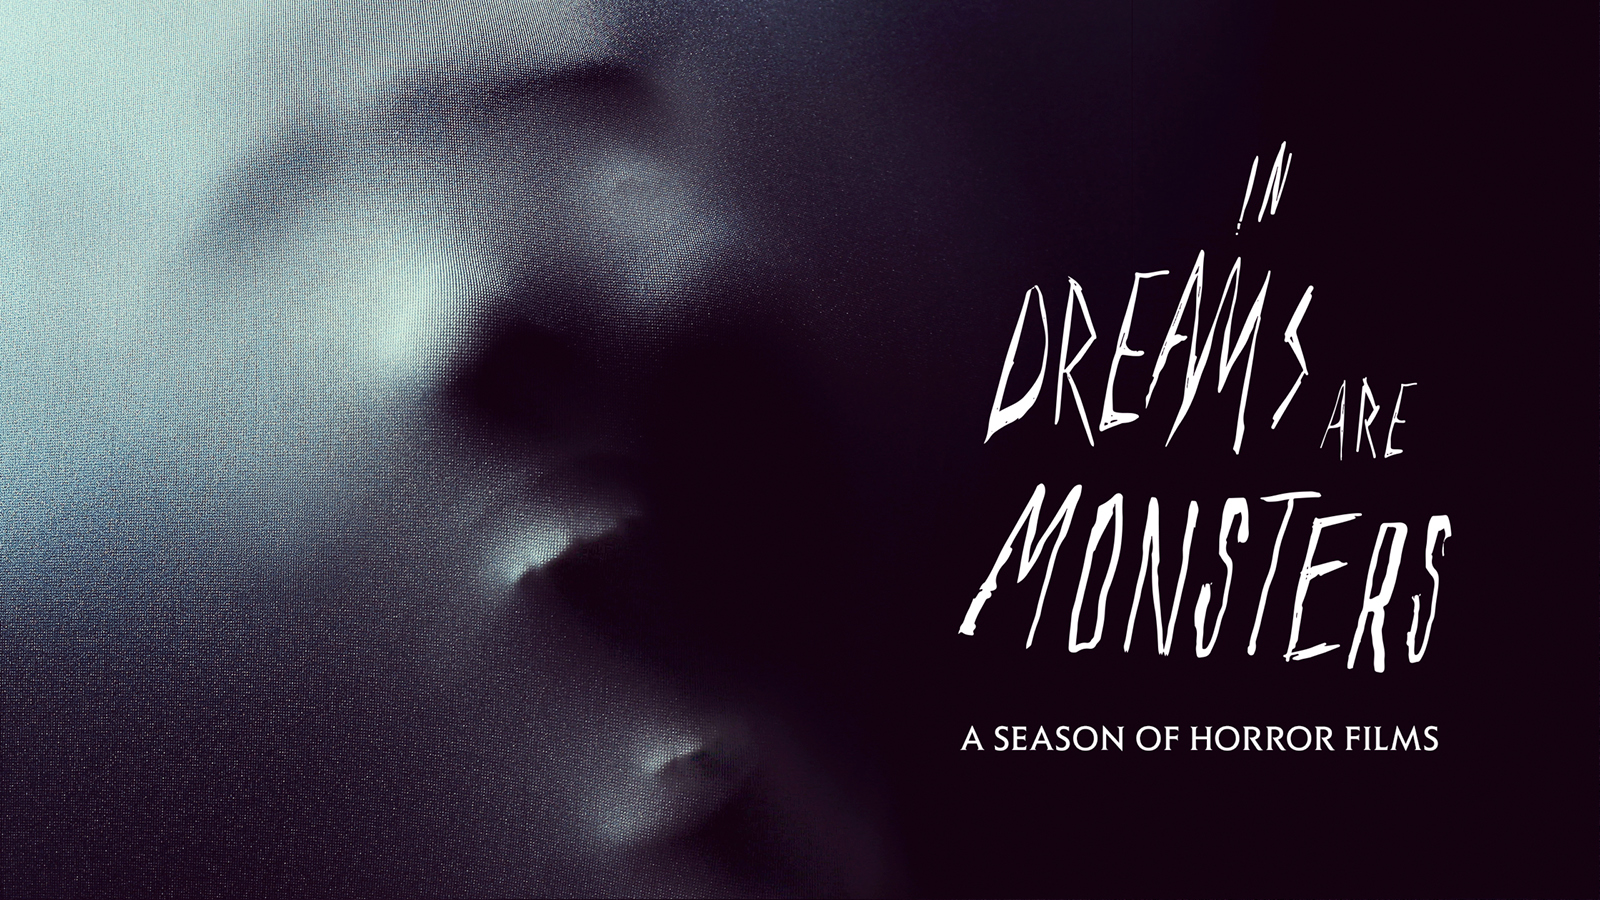 BFI - In Dreams Are Monsters